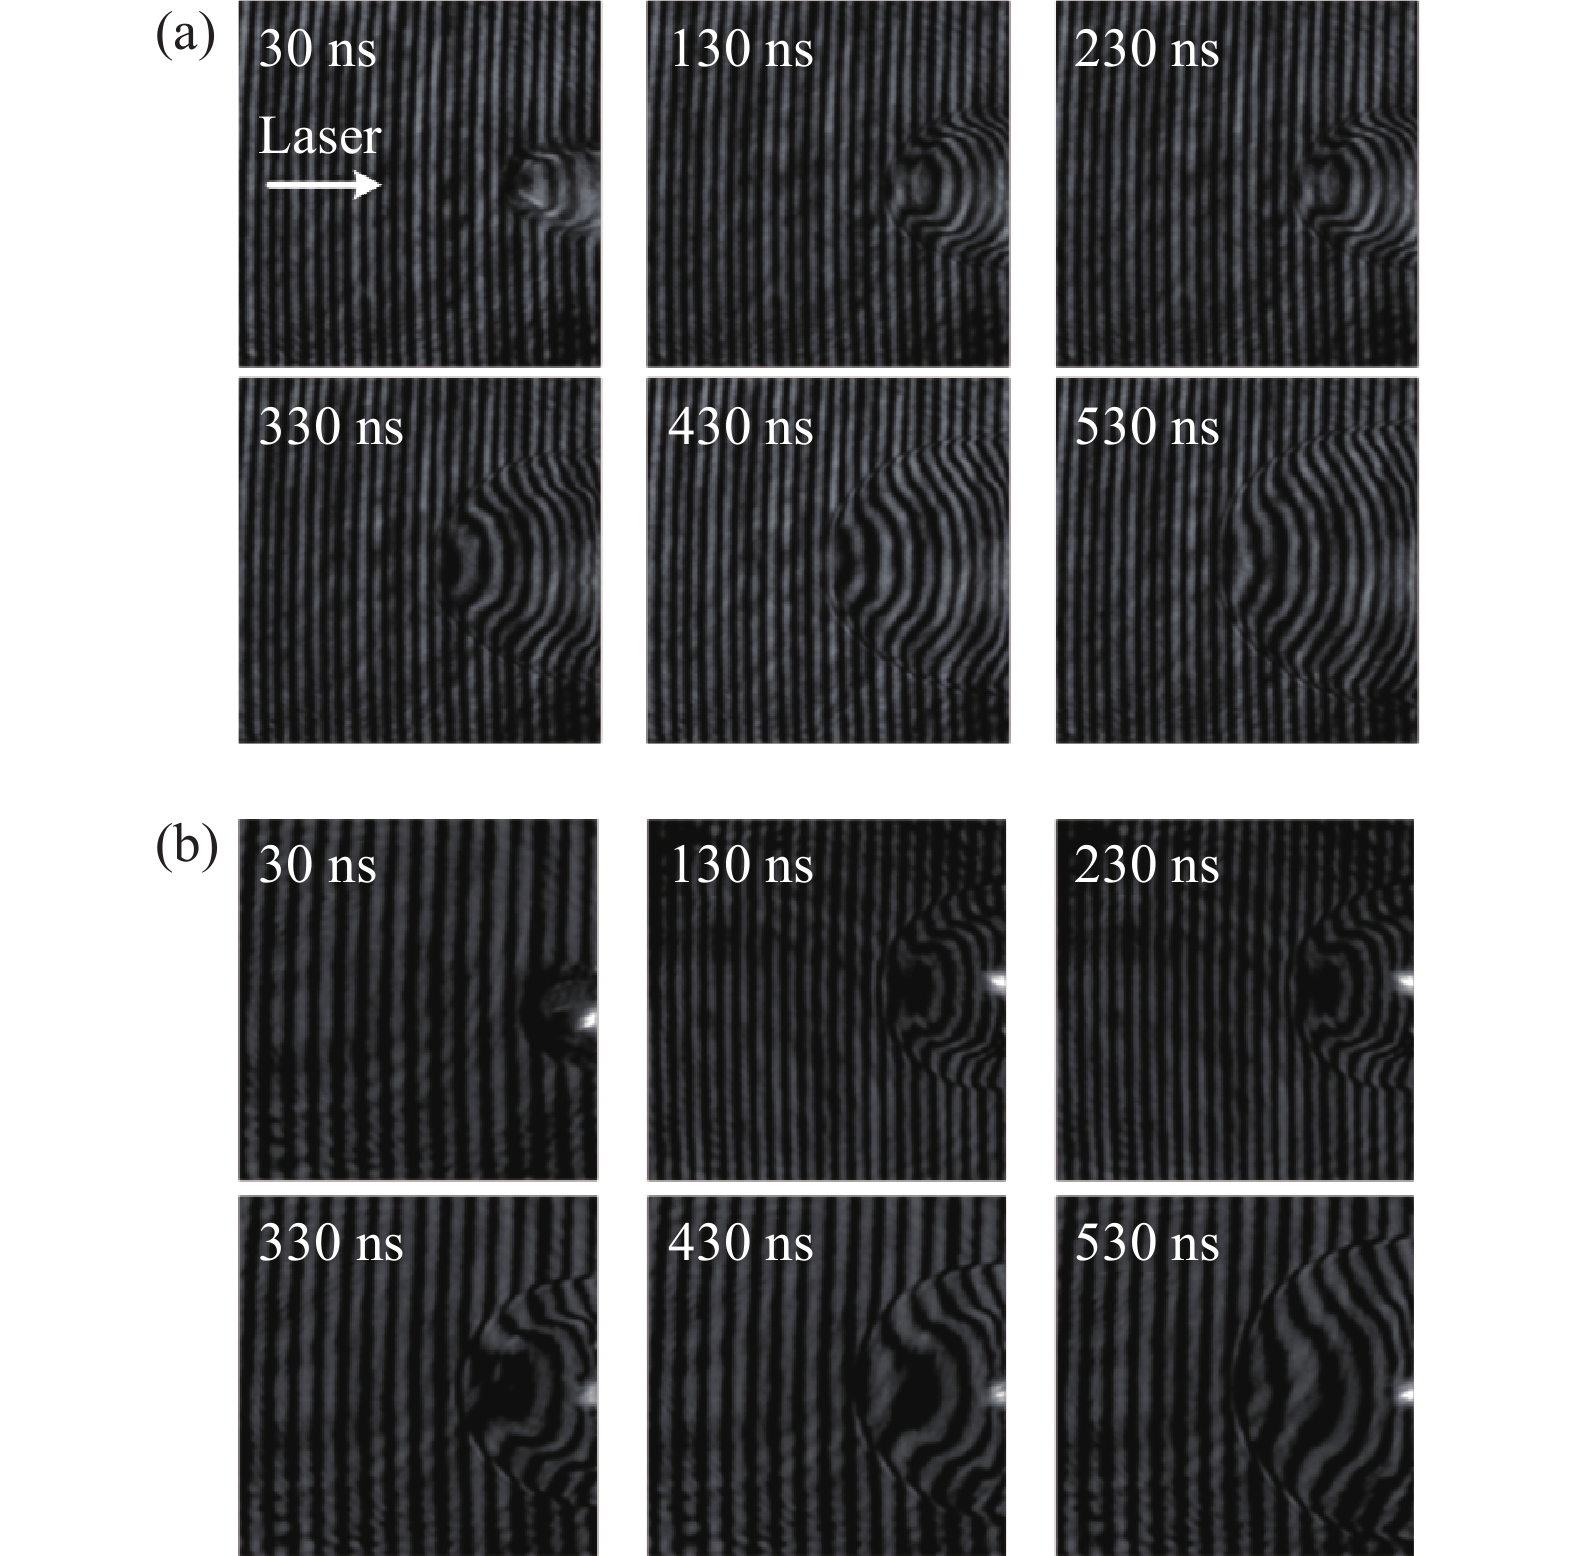 Time resolved images of plasmas produced by the double-pulse. (a) 532 nm wavelength laser interferogram; (b) 1064 nm wavelength laser interferogram